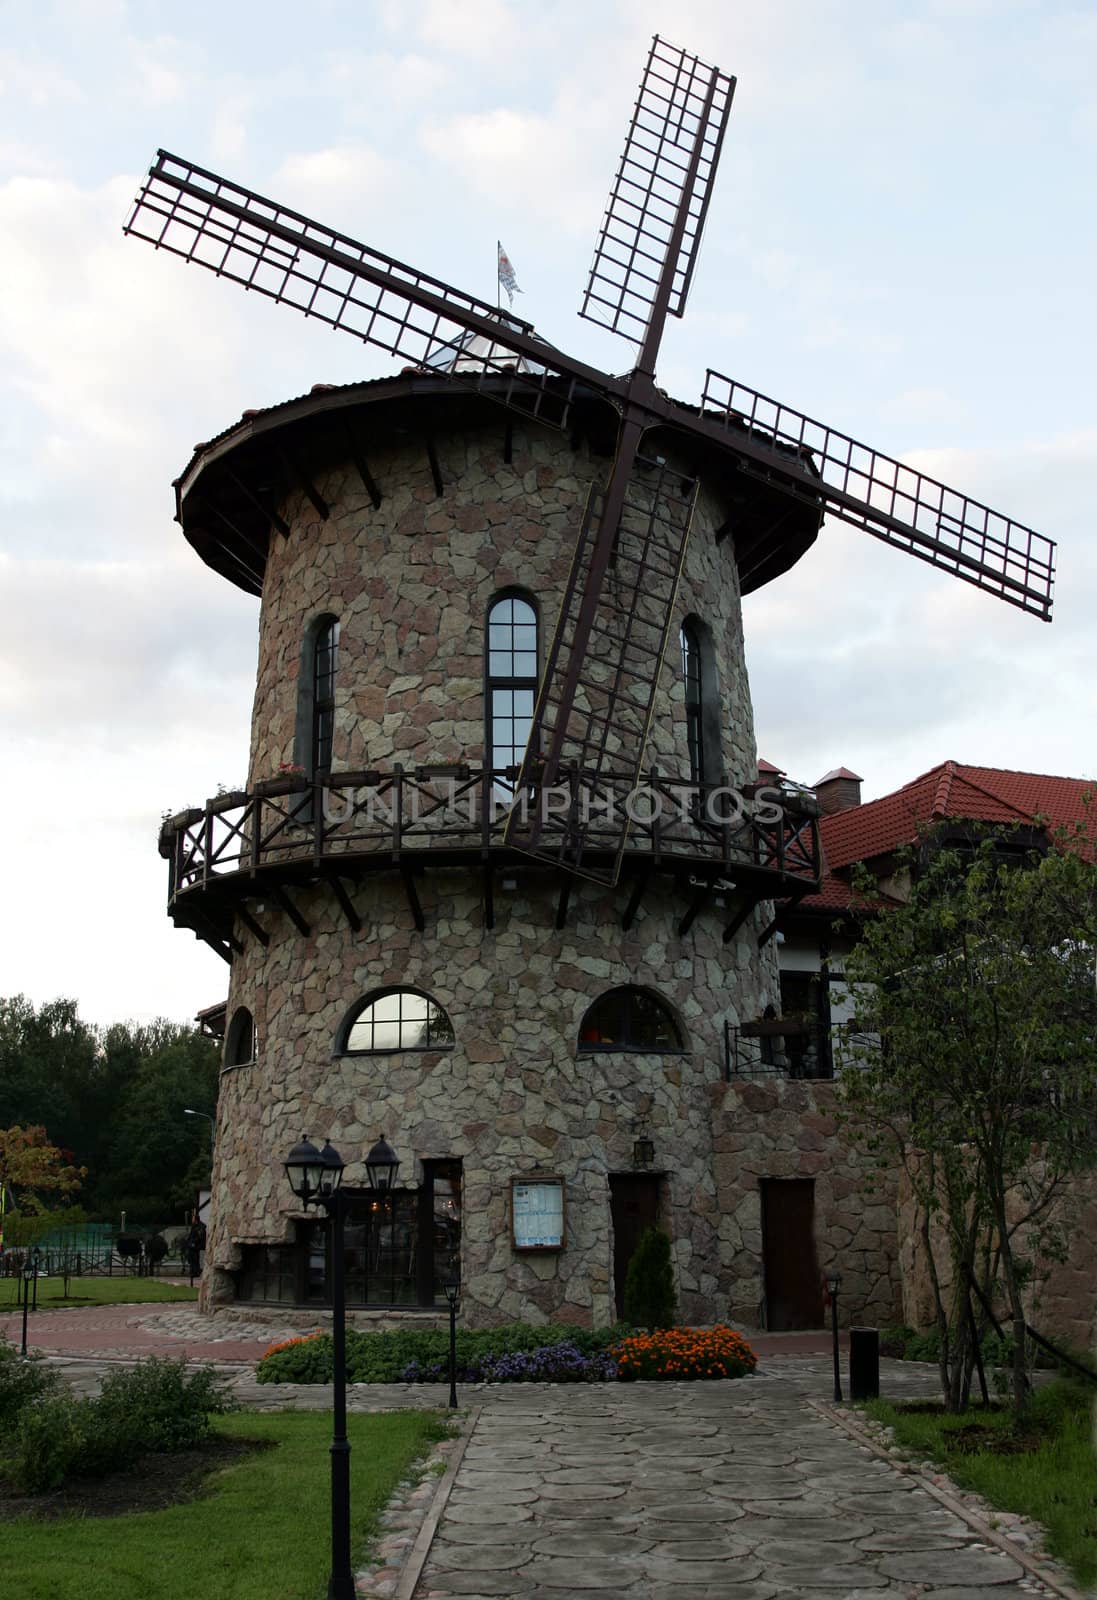 Exterior of Dutch windmill pictured near to Amsterdam.